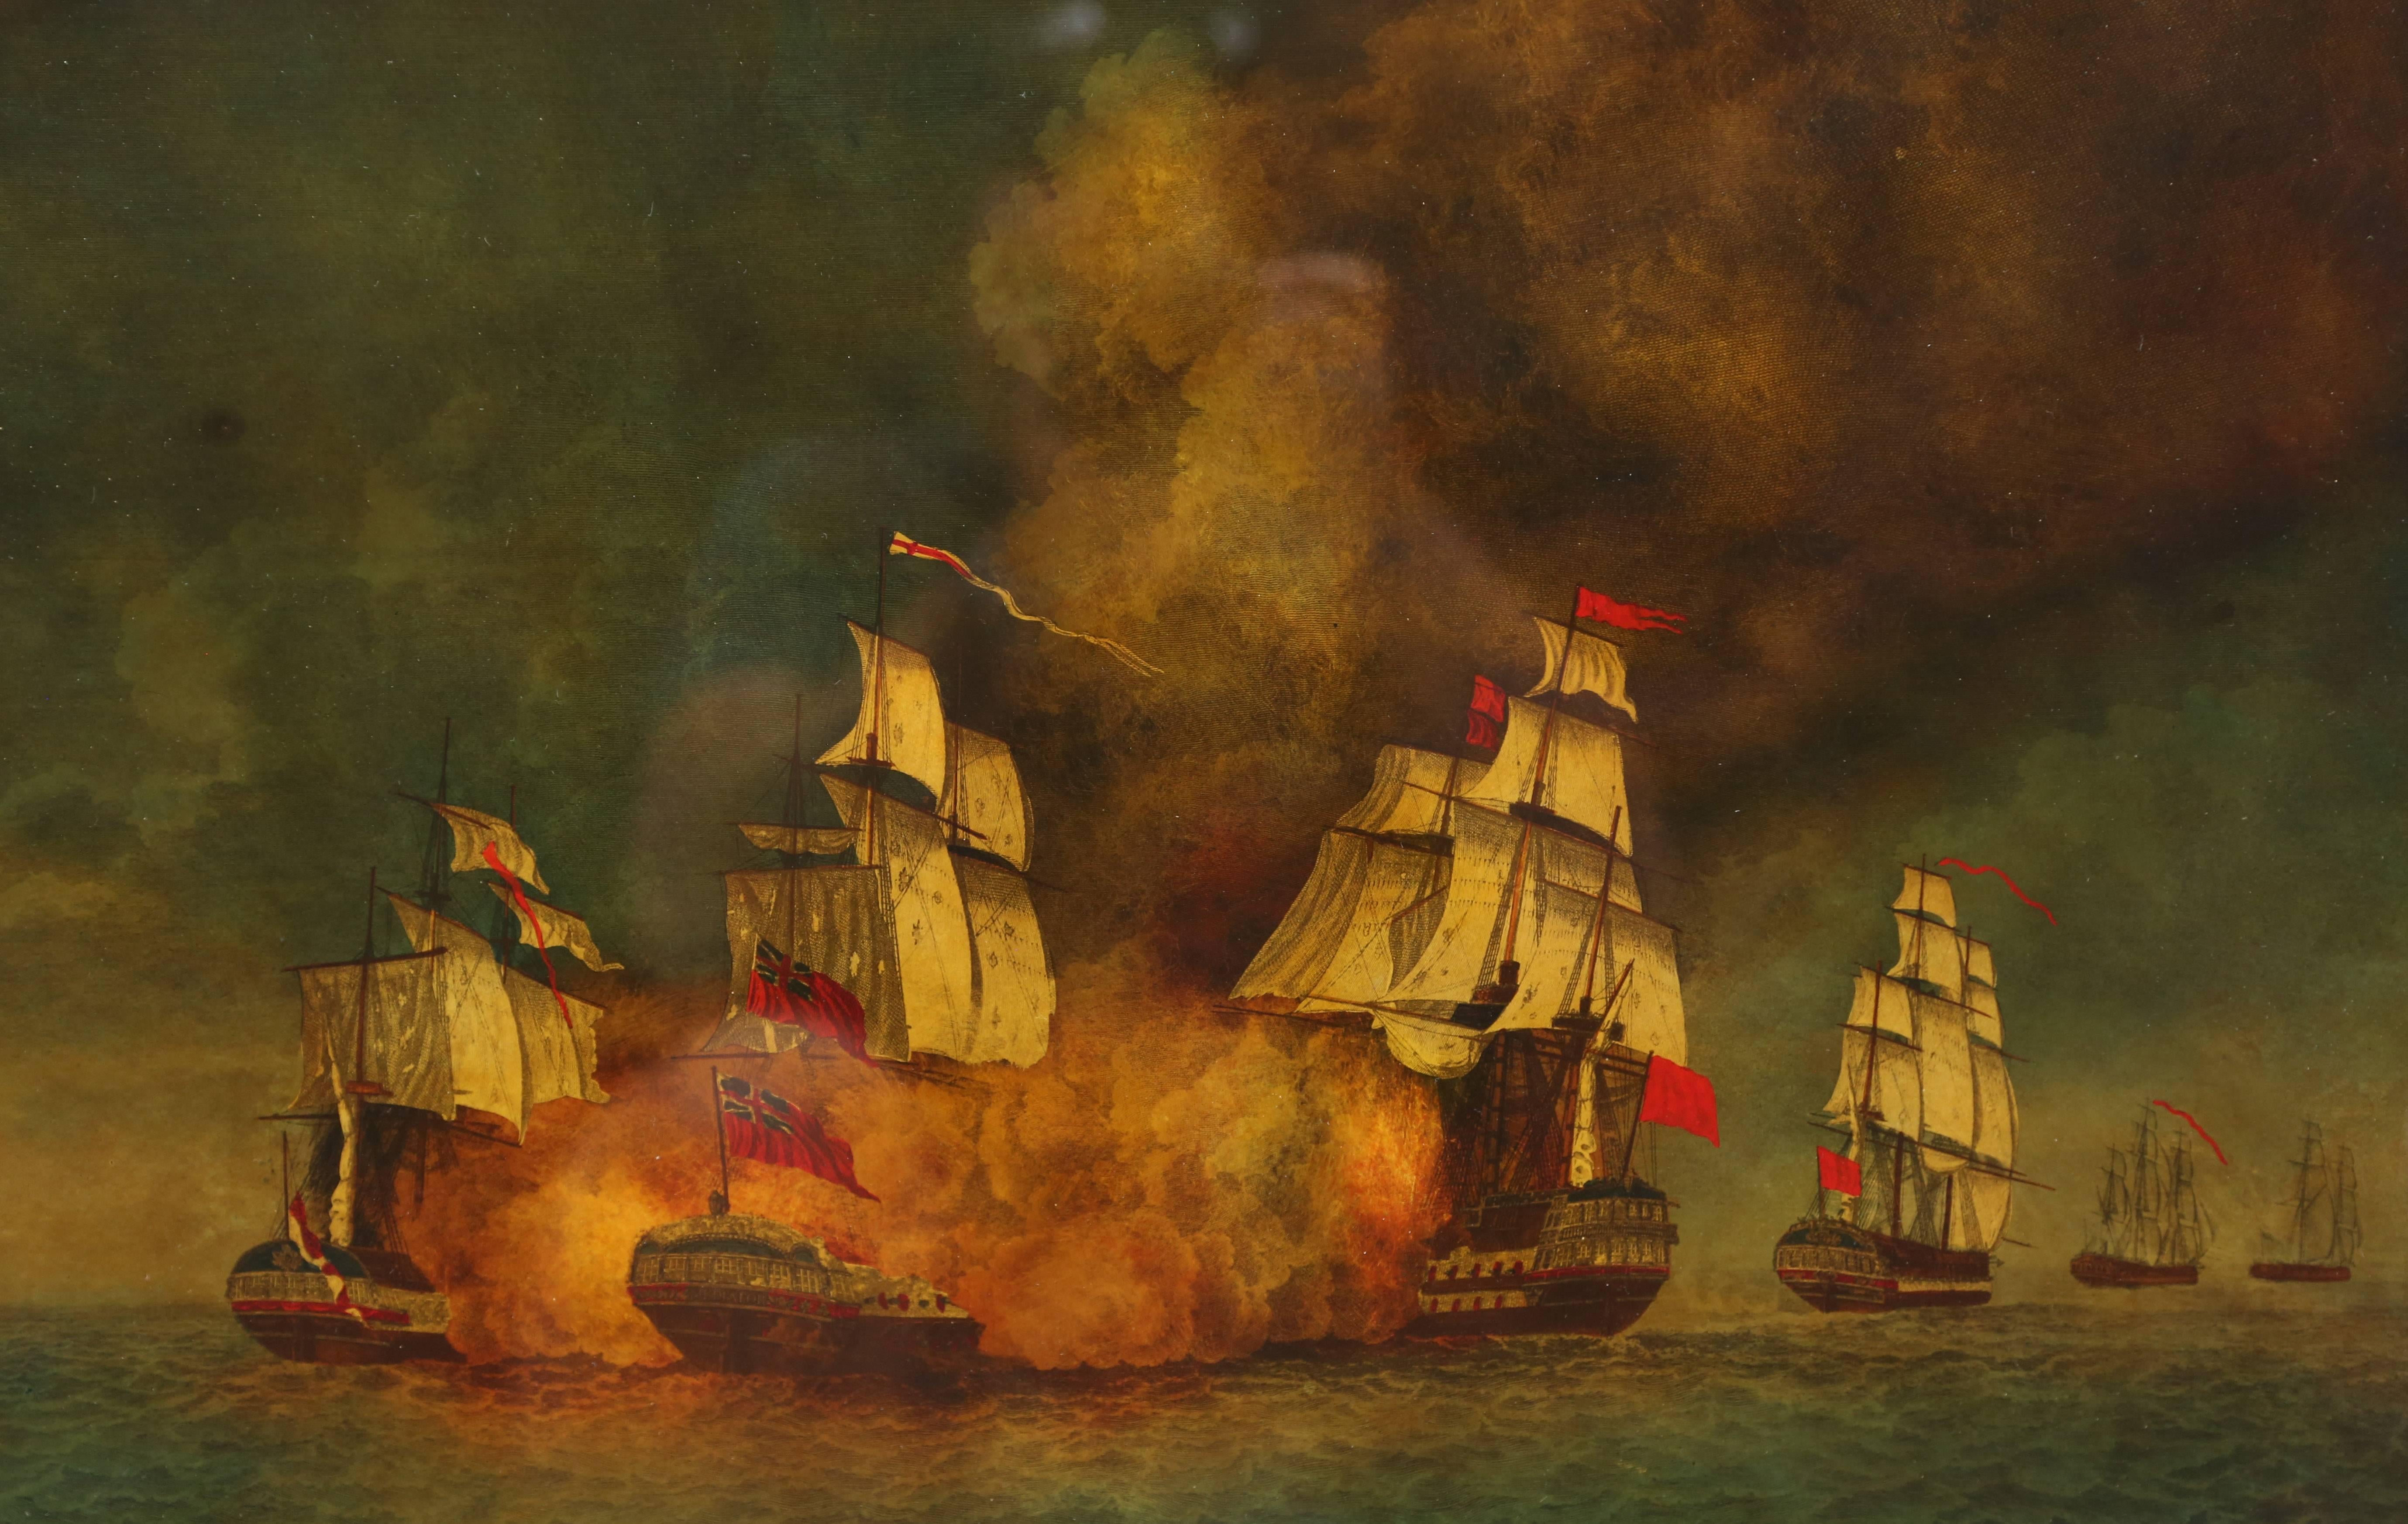 Reverse painted maritime image depicting a historic naval battle during the Napoleonic wars known as the battle of Aix roads. Dark and moody this reverse painted image commemorates the fireships of the English led by Captain Lord Cochrane in his